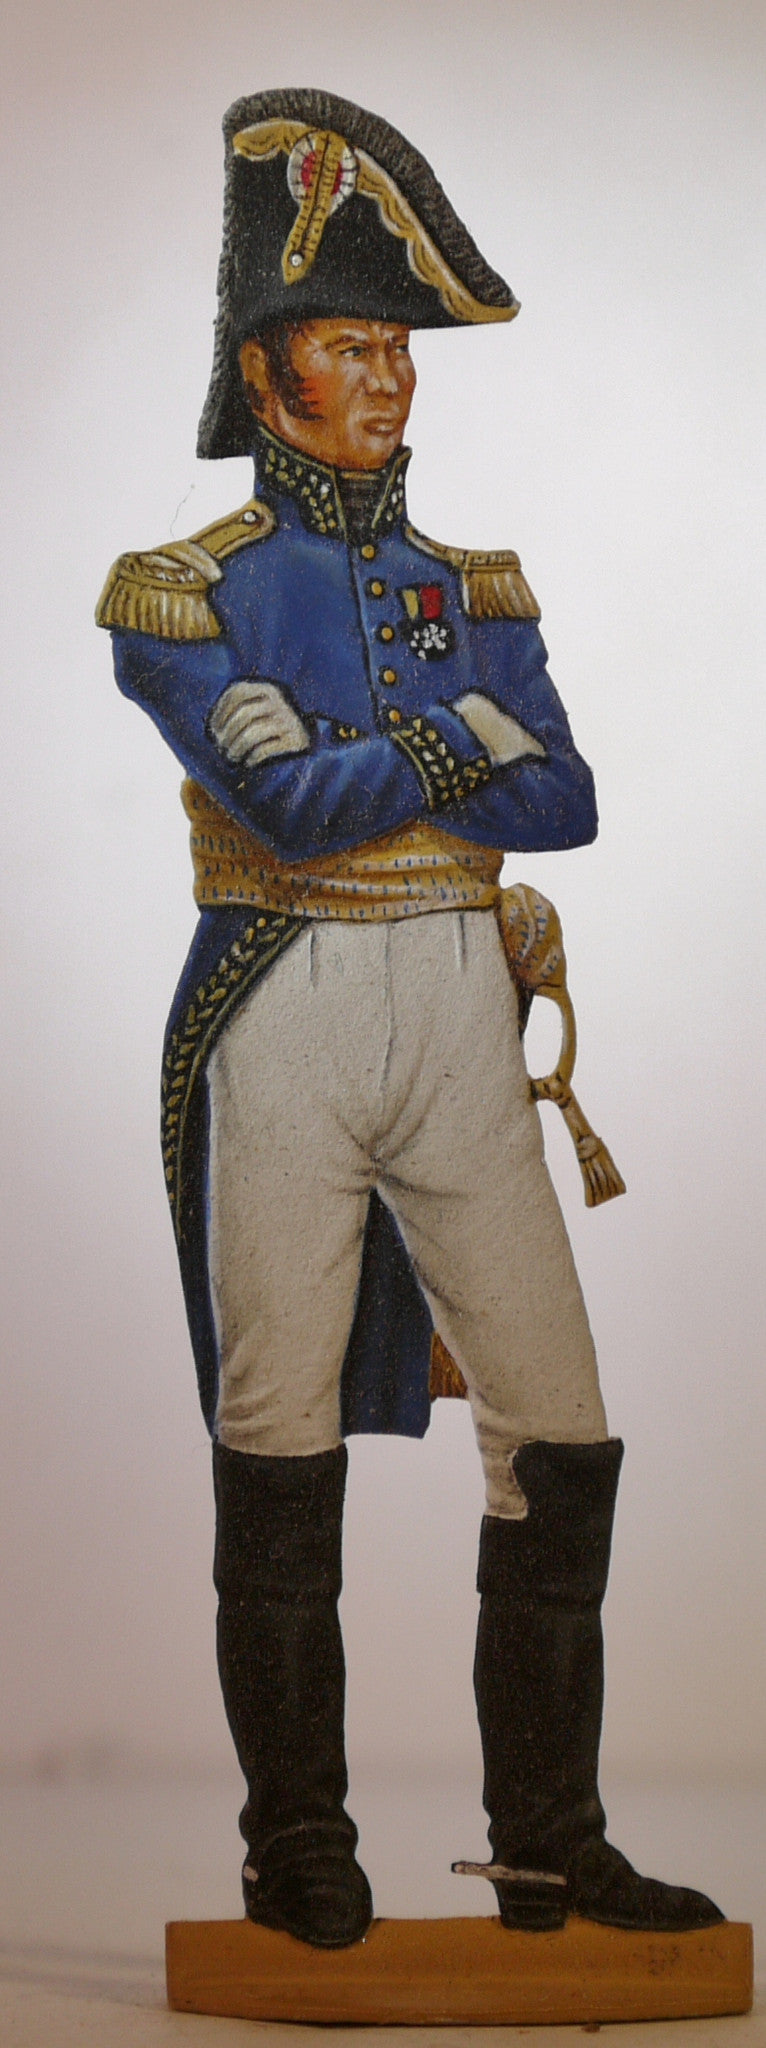 Marshal Marmomt - Glorious Empires-Historical Miniatures  